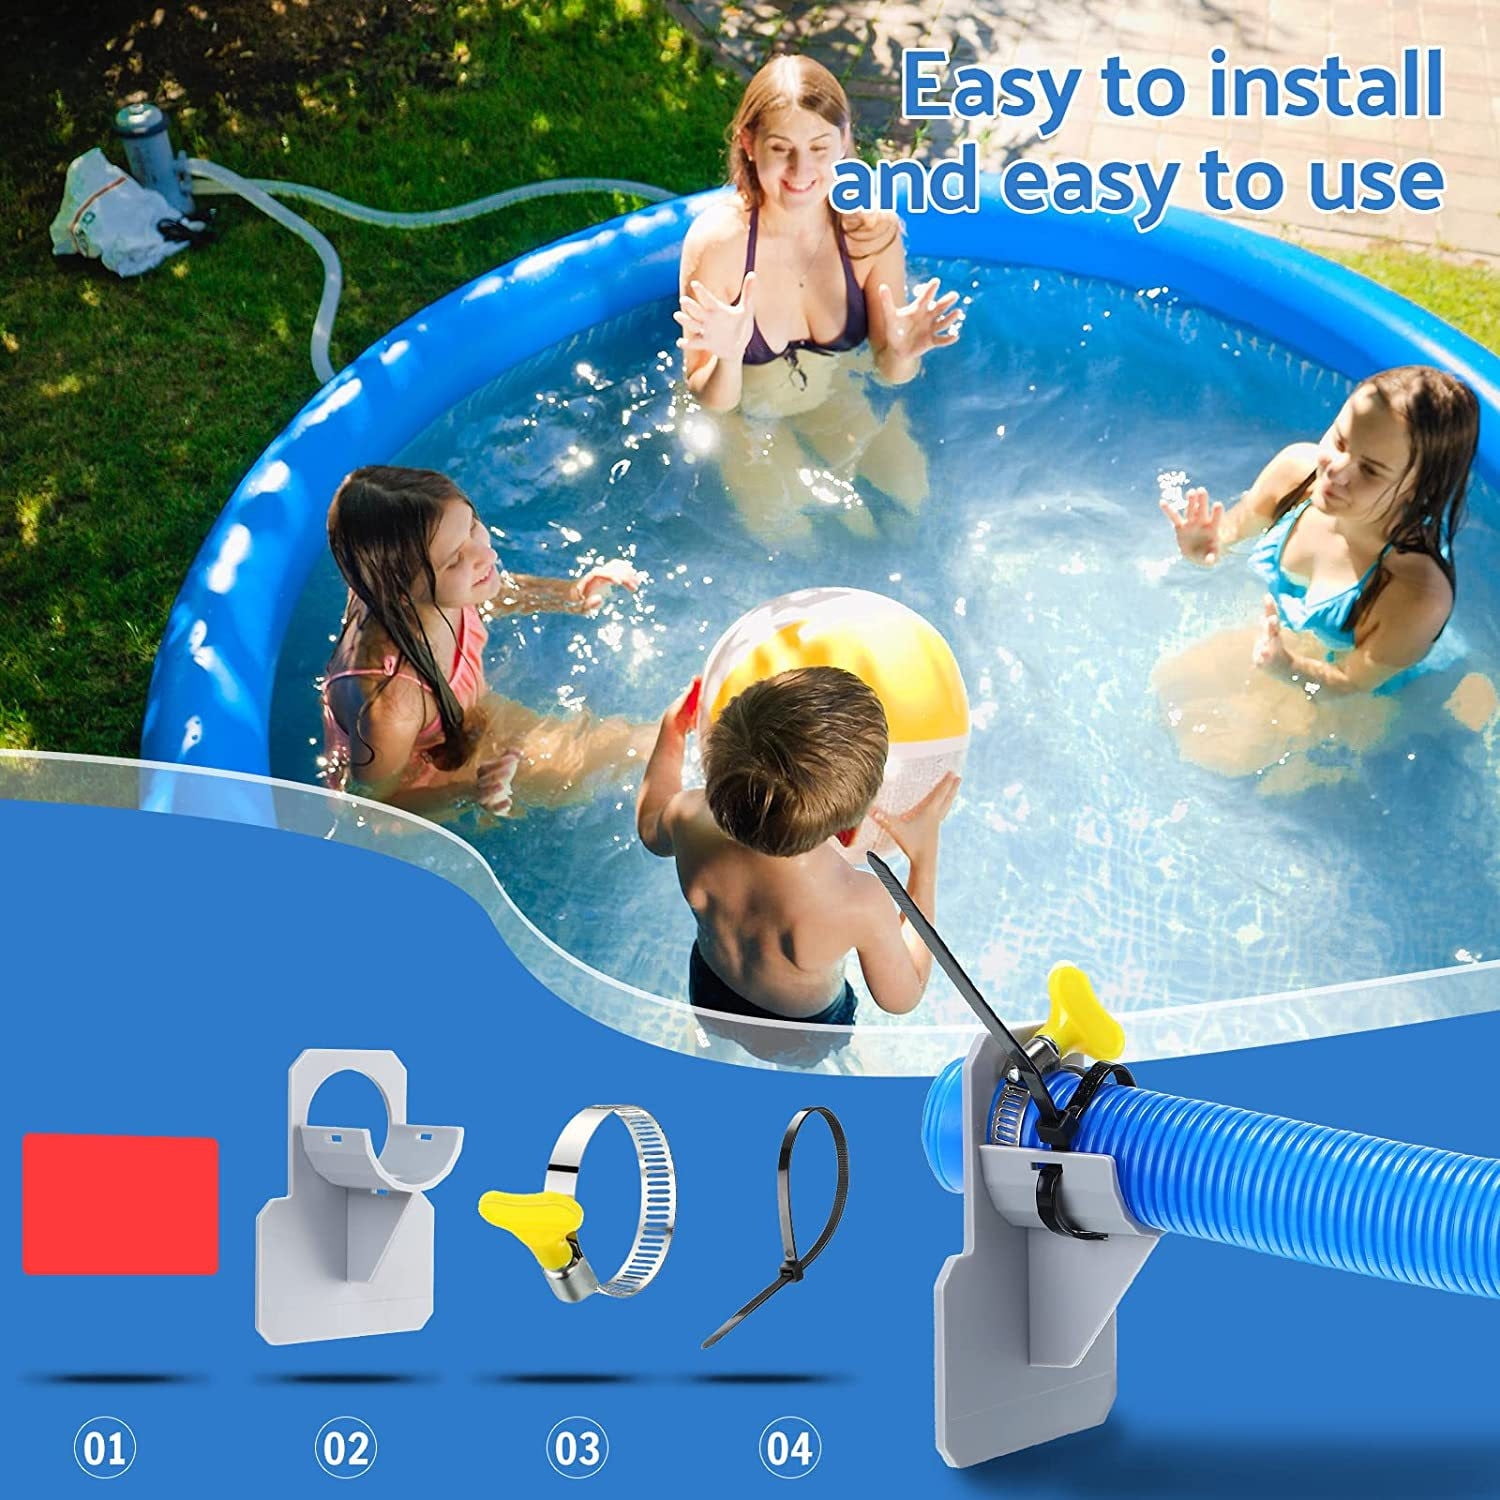 Kuluzego 2Pcs Swimming Pipe Holders,Above Ground Pool Accessories,Pool Accessories,Pool Hoses for Pools,Preventing Pipe Sagging Clearance" - Walmart.com